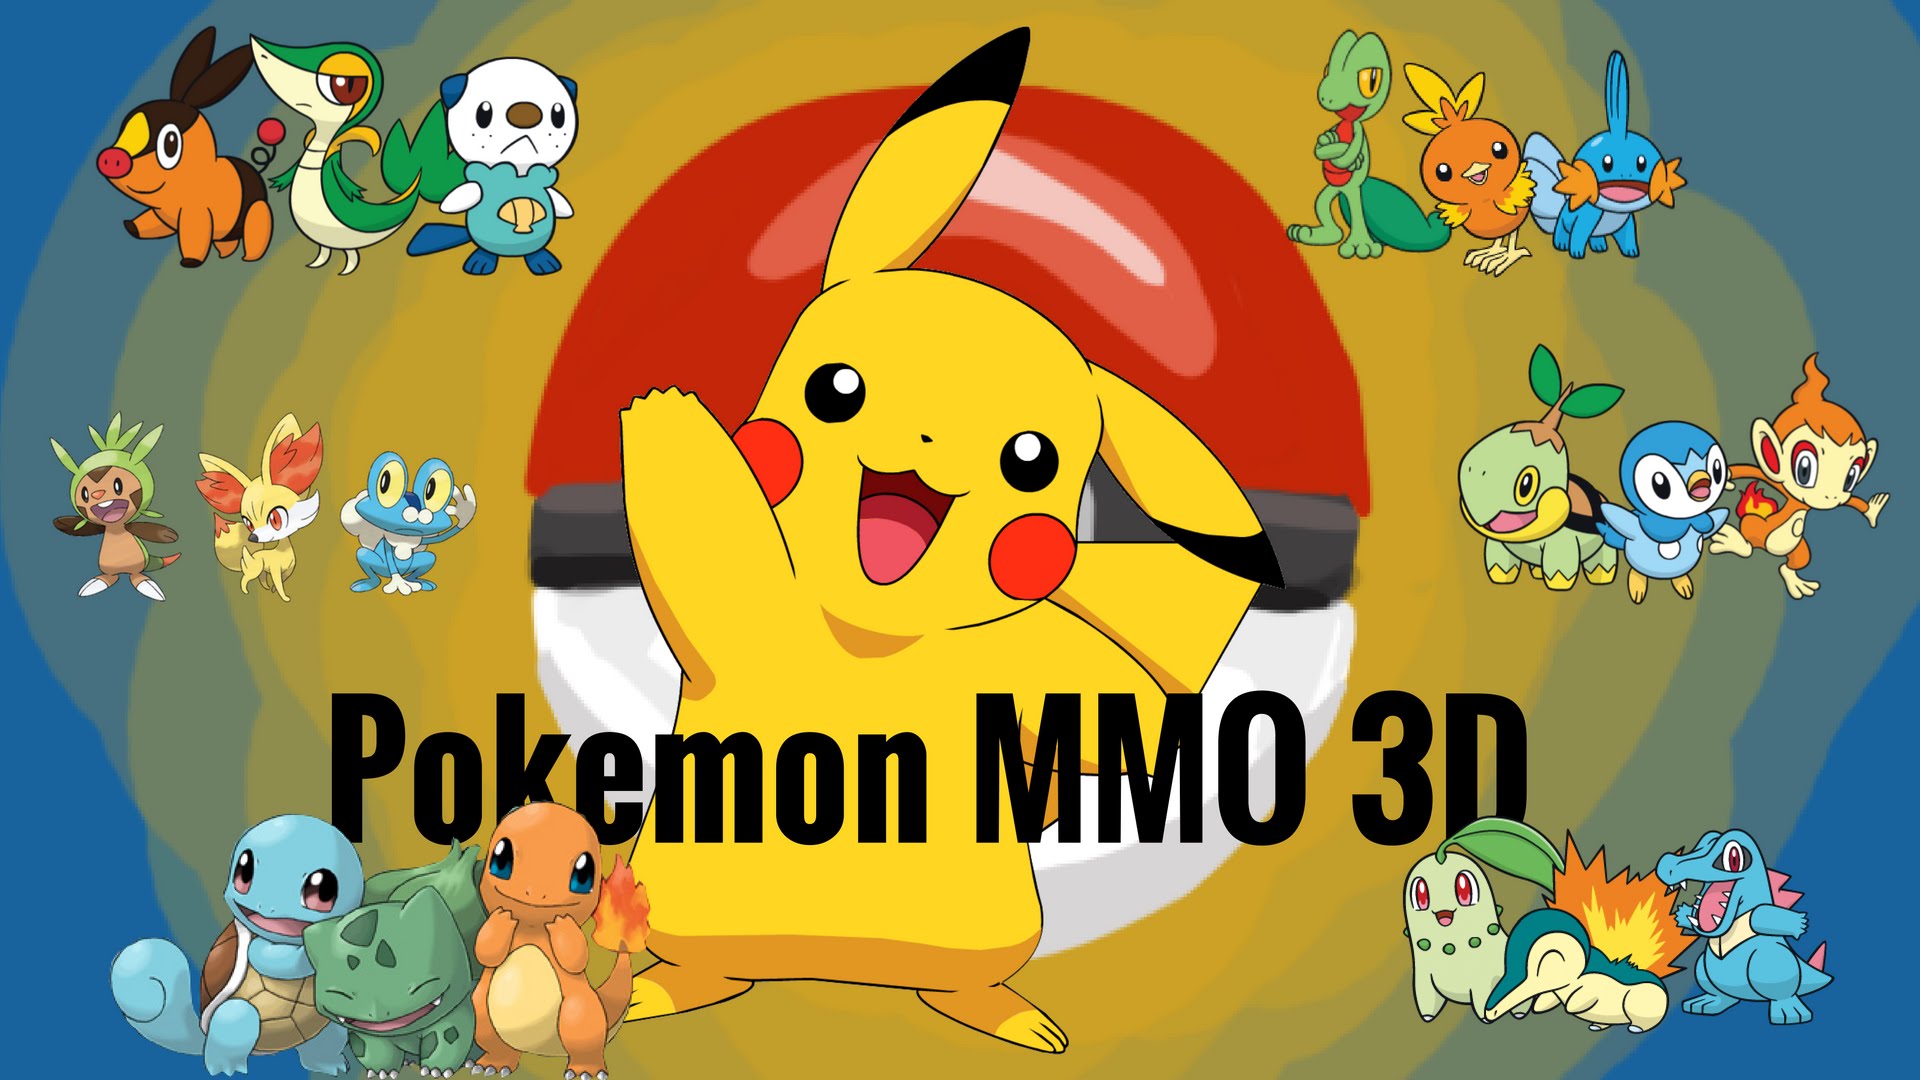 Pokemon MMO 3D | NEW FEATURE ARRIVALS